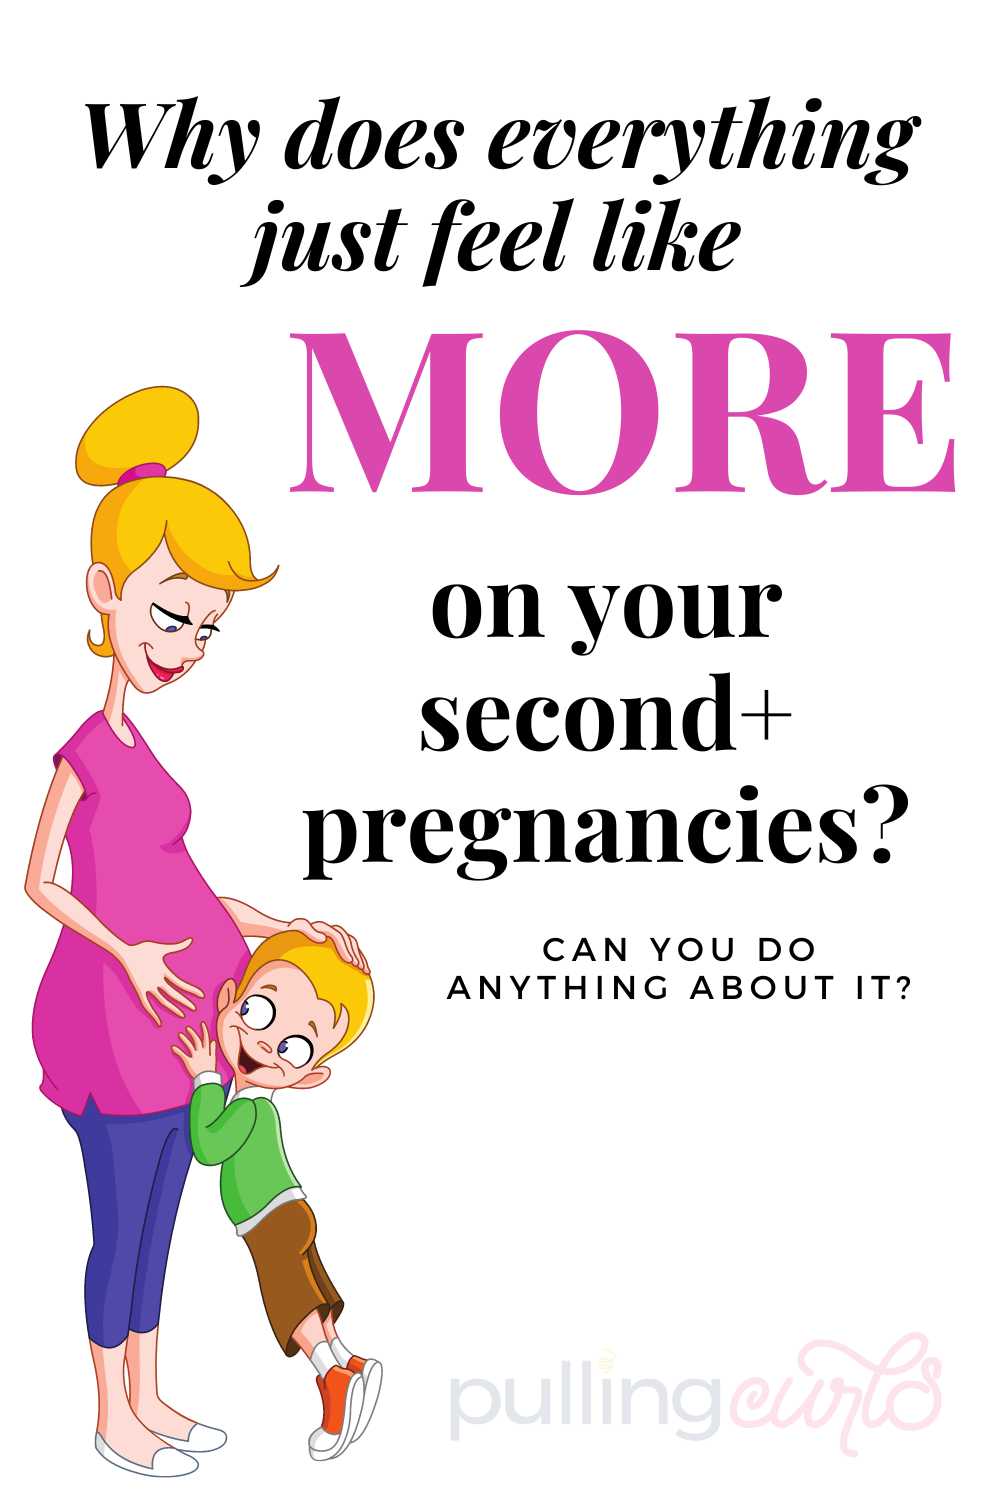 pregnant woman and son / why does everythign just feel MORE on your second+ pregnancies / can you do anything about it? via @pullingcurls